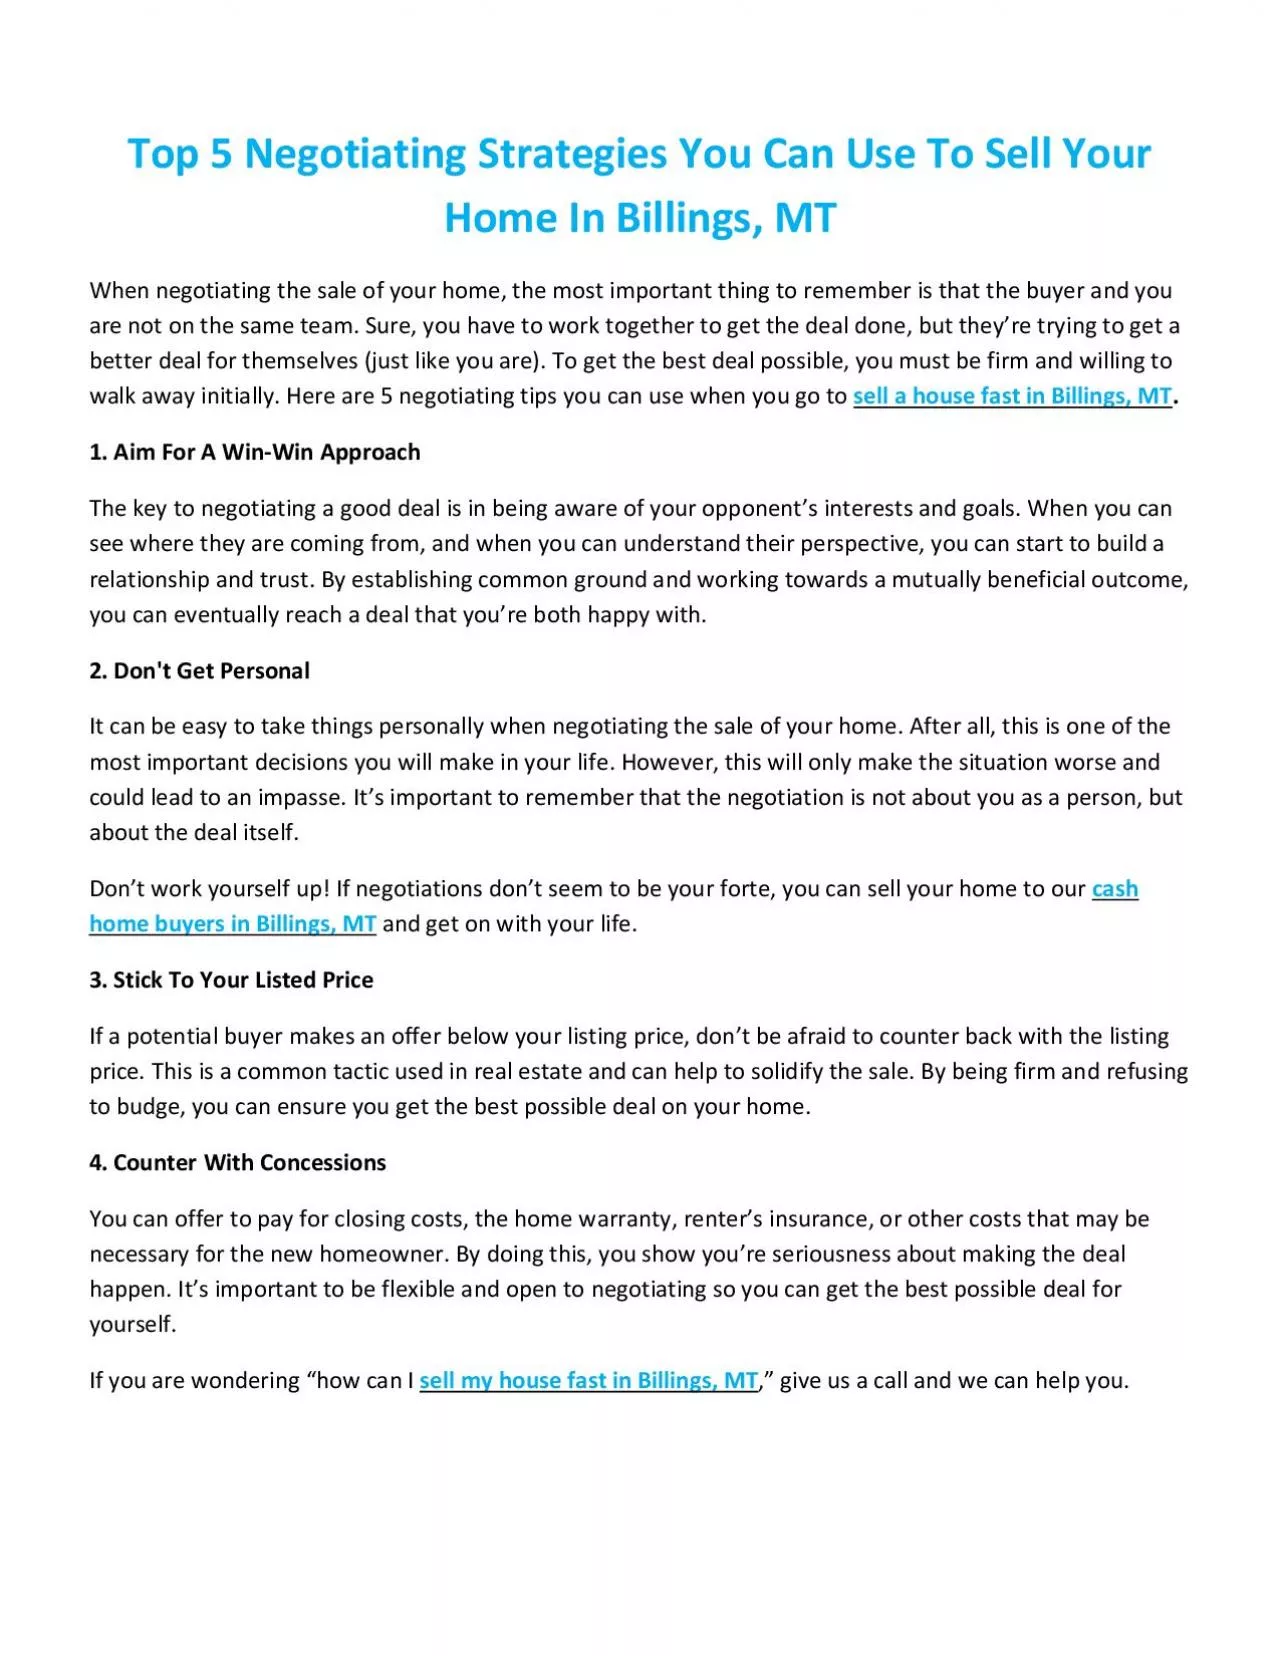 Top 5 Negotiating Strategies You Can Use To Sell Your Home In Billings, MT